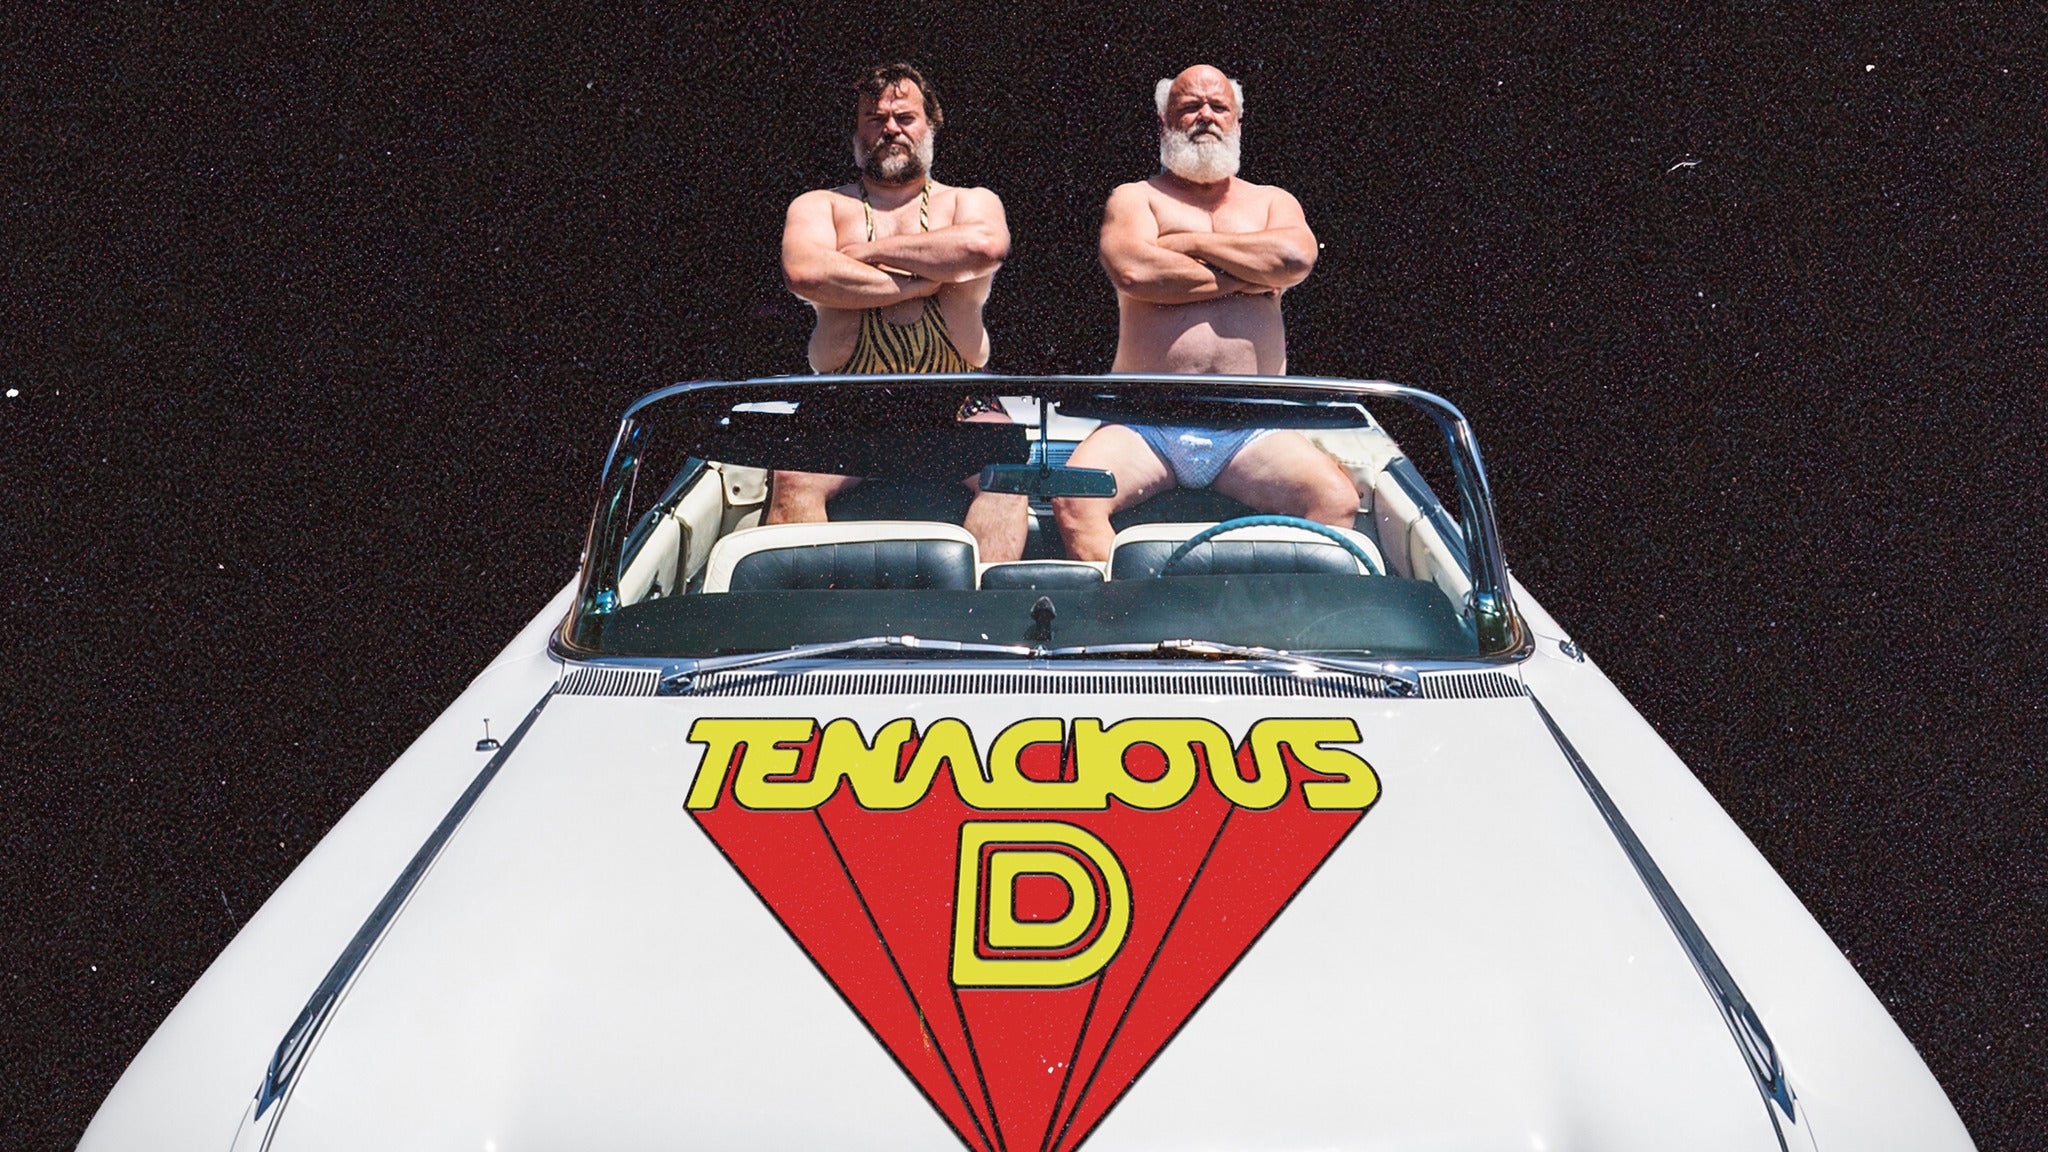 Tenacious D - The Spicy Meatball Tour presale code for performance tickets in Chesterfield, MO (The Factory)